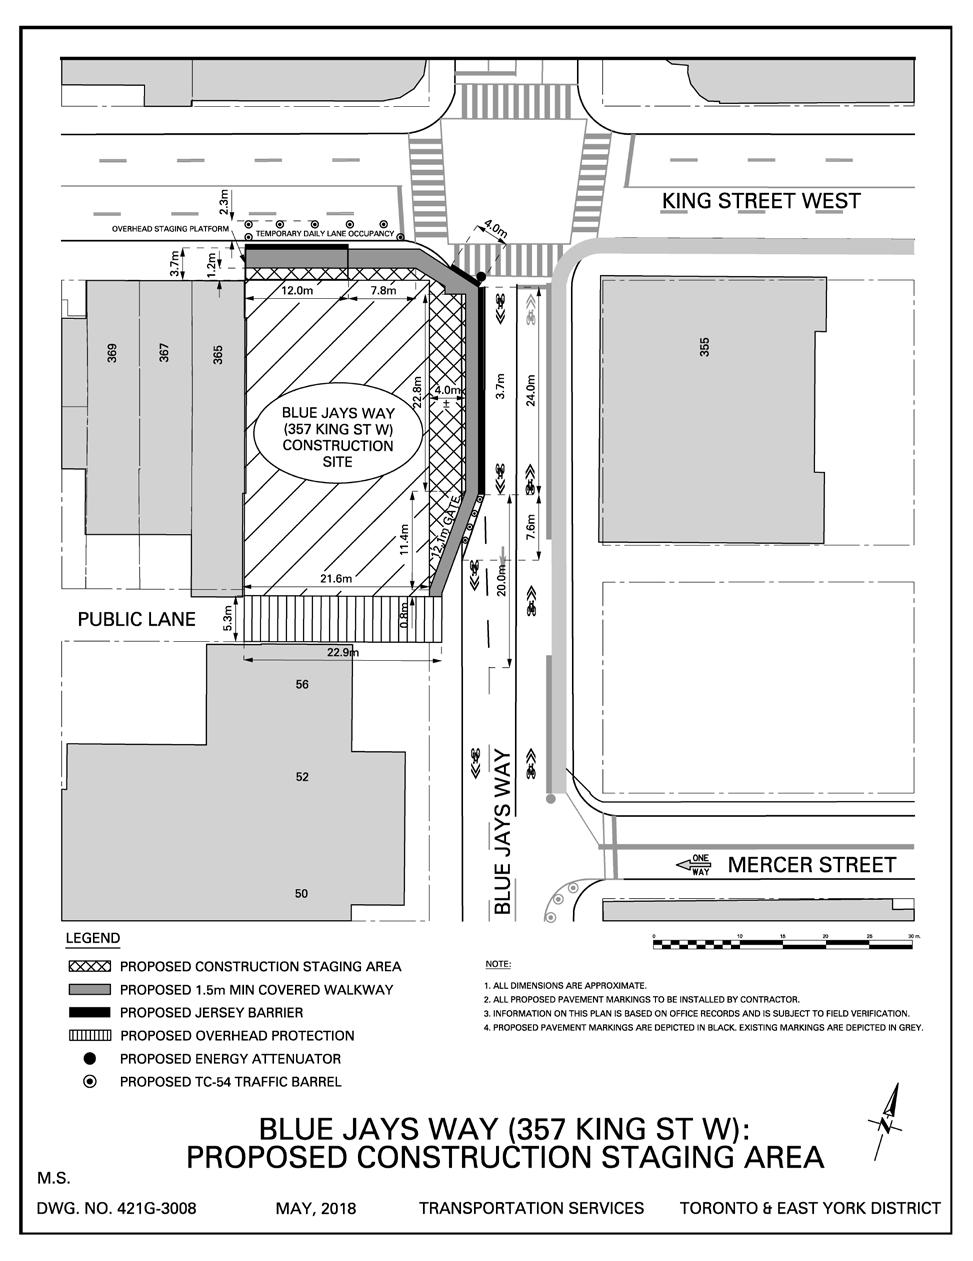 Construction Staging Area - Blue Jays Way (357 King Street West)